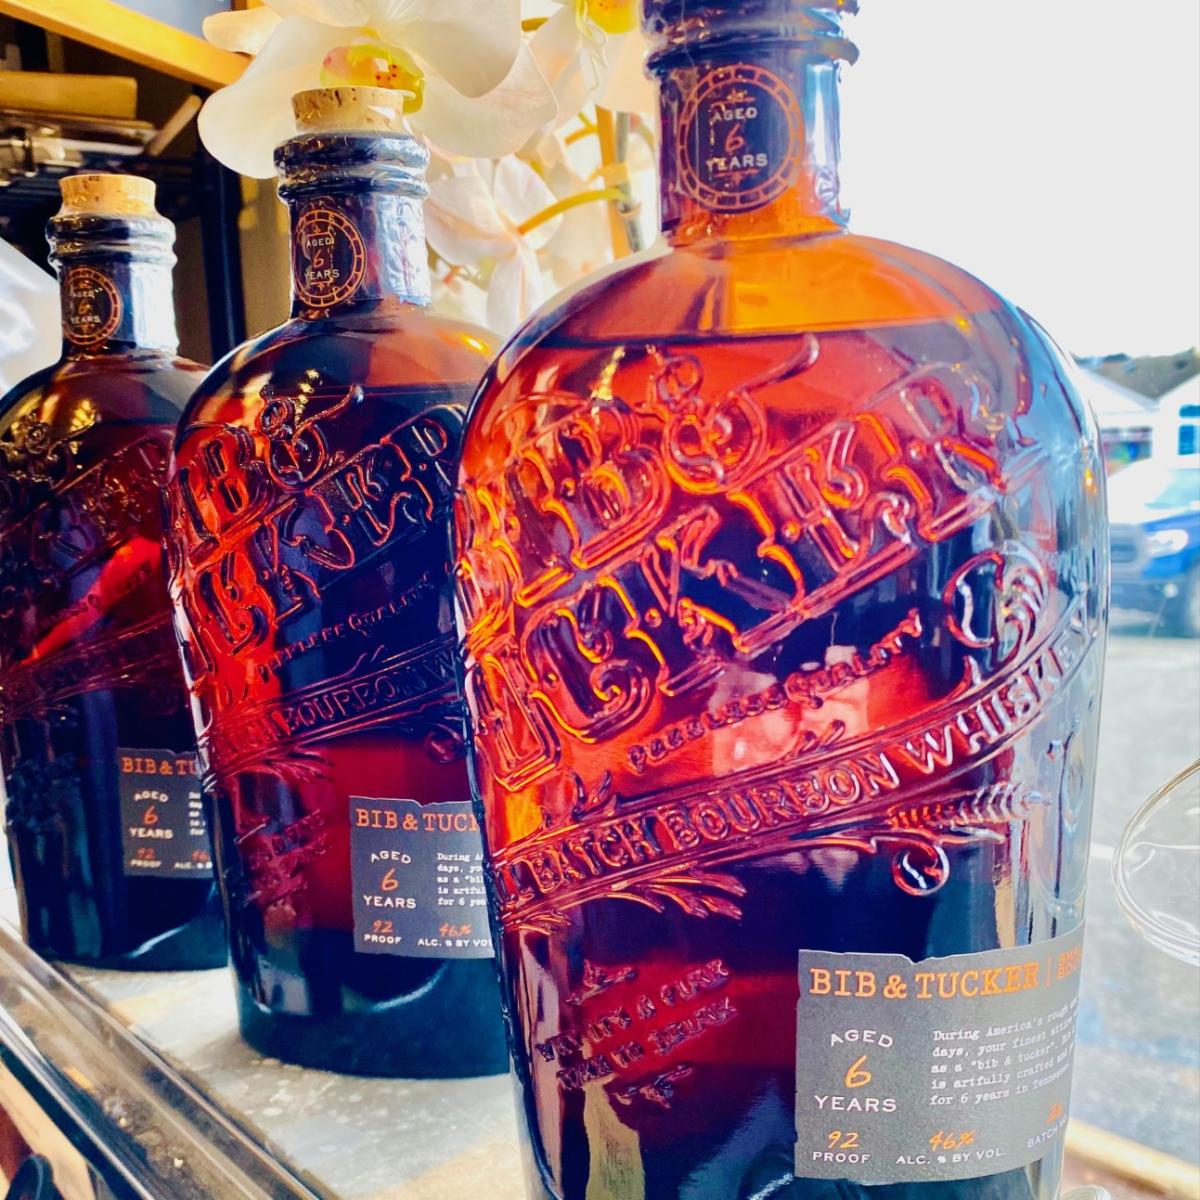 Chase away the winter gloom with the deliciously smooth Bib & Tucker Small Batch Bourbon #bibandtucker #smallbatchbourbon #warmwinternights #easthampton #thehamptons